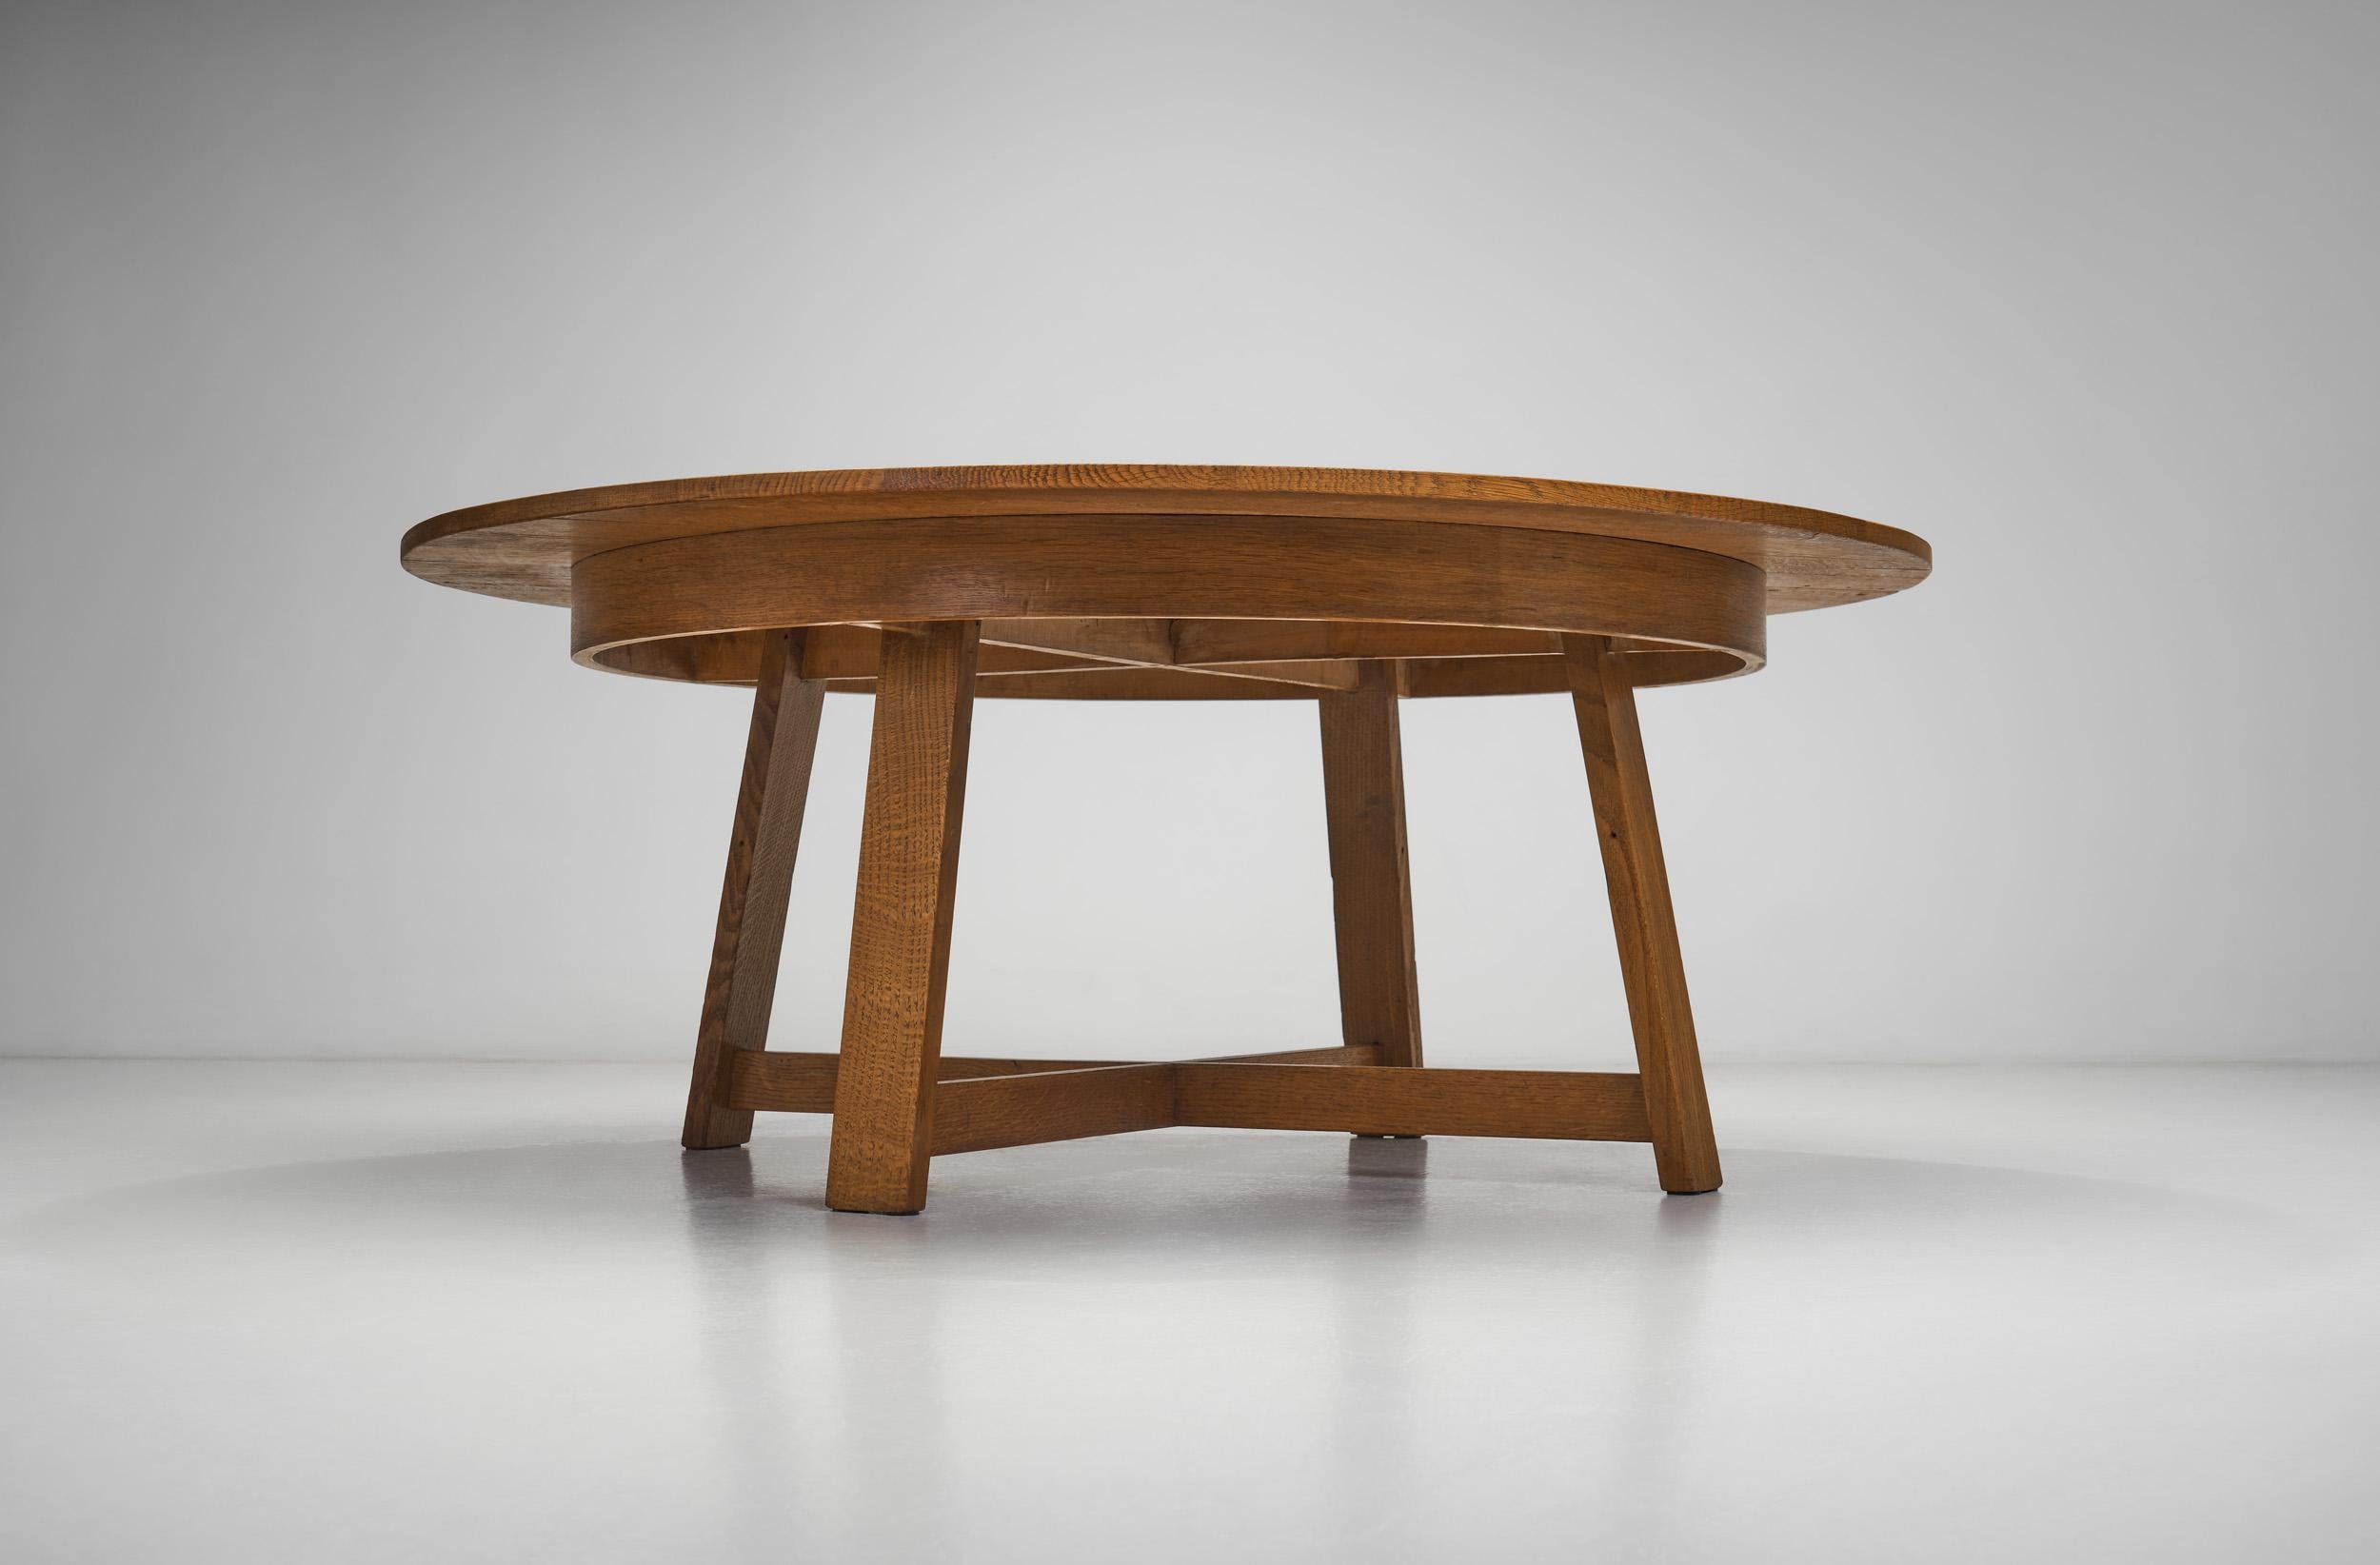 Circular Solid Wood Table with Cross Stretchers, Europe ca 1960s For Sale 8